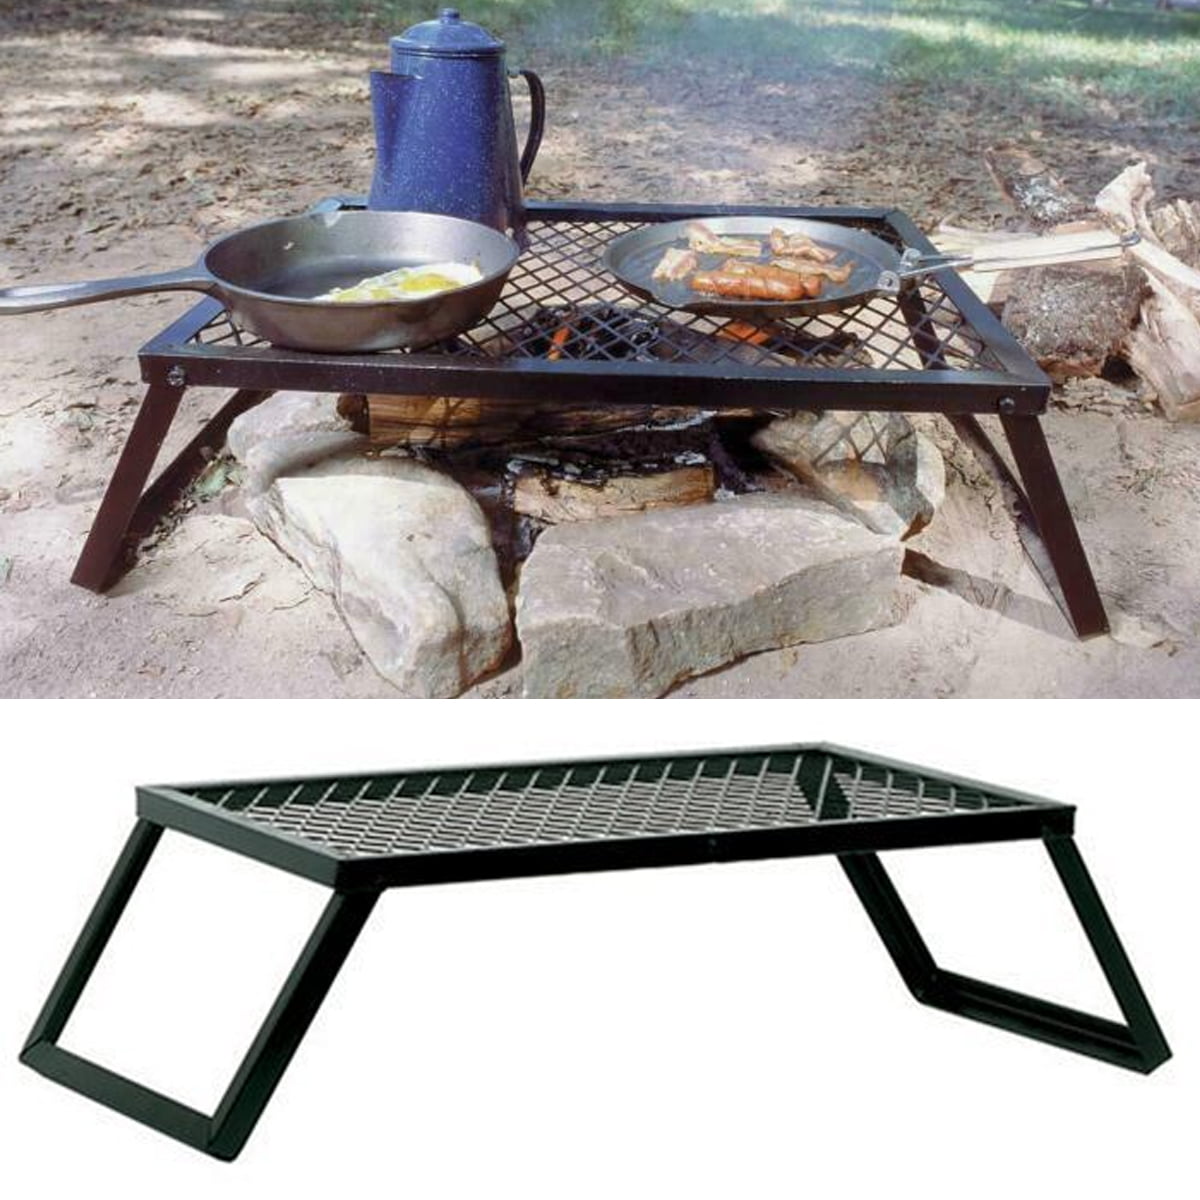 Heavy Duty Outdoor Camping Grill Grate with Legs RedSwing Portable Folding Campfire Grill